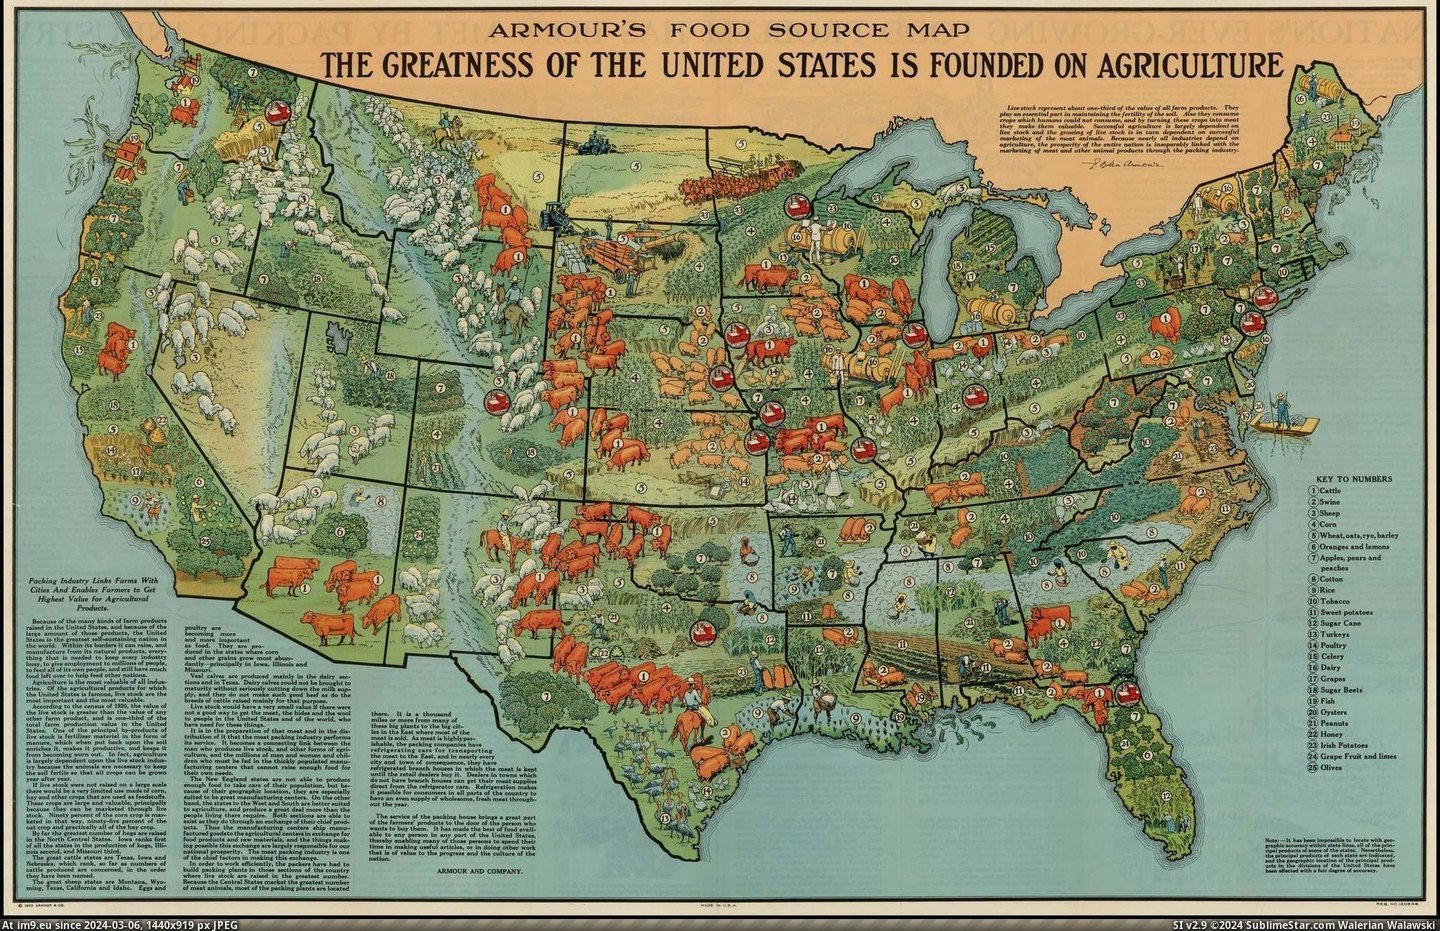 #American  #Agriculture [Mapporn] American agriculture in 1922 [2011×1296] Pic. (Image of album My r/MAPS favs))